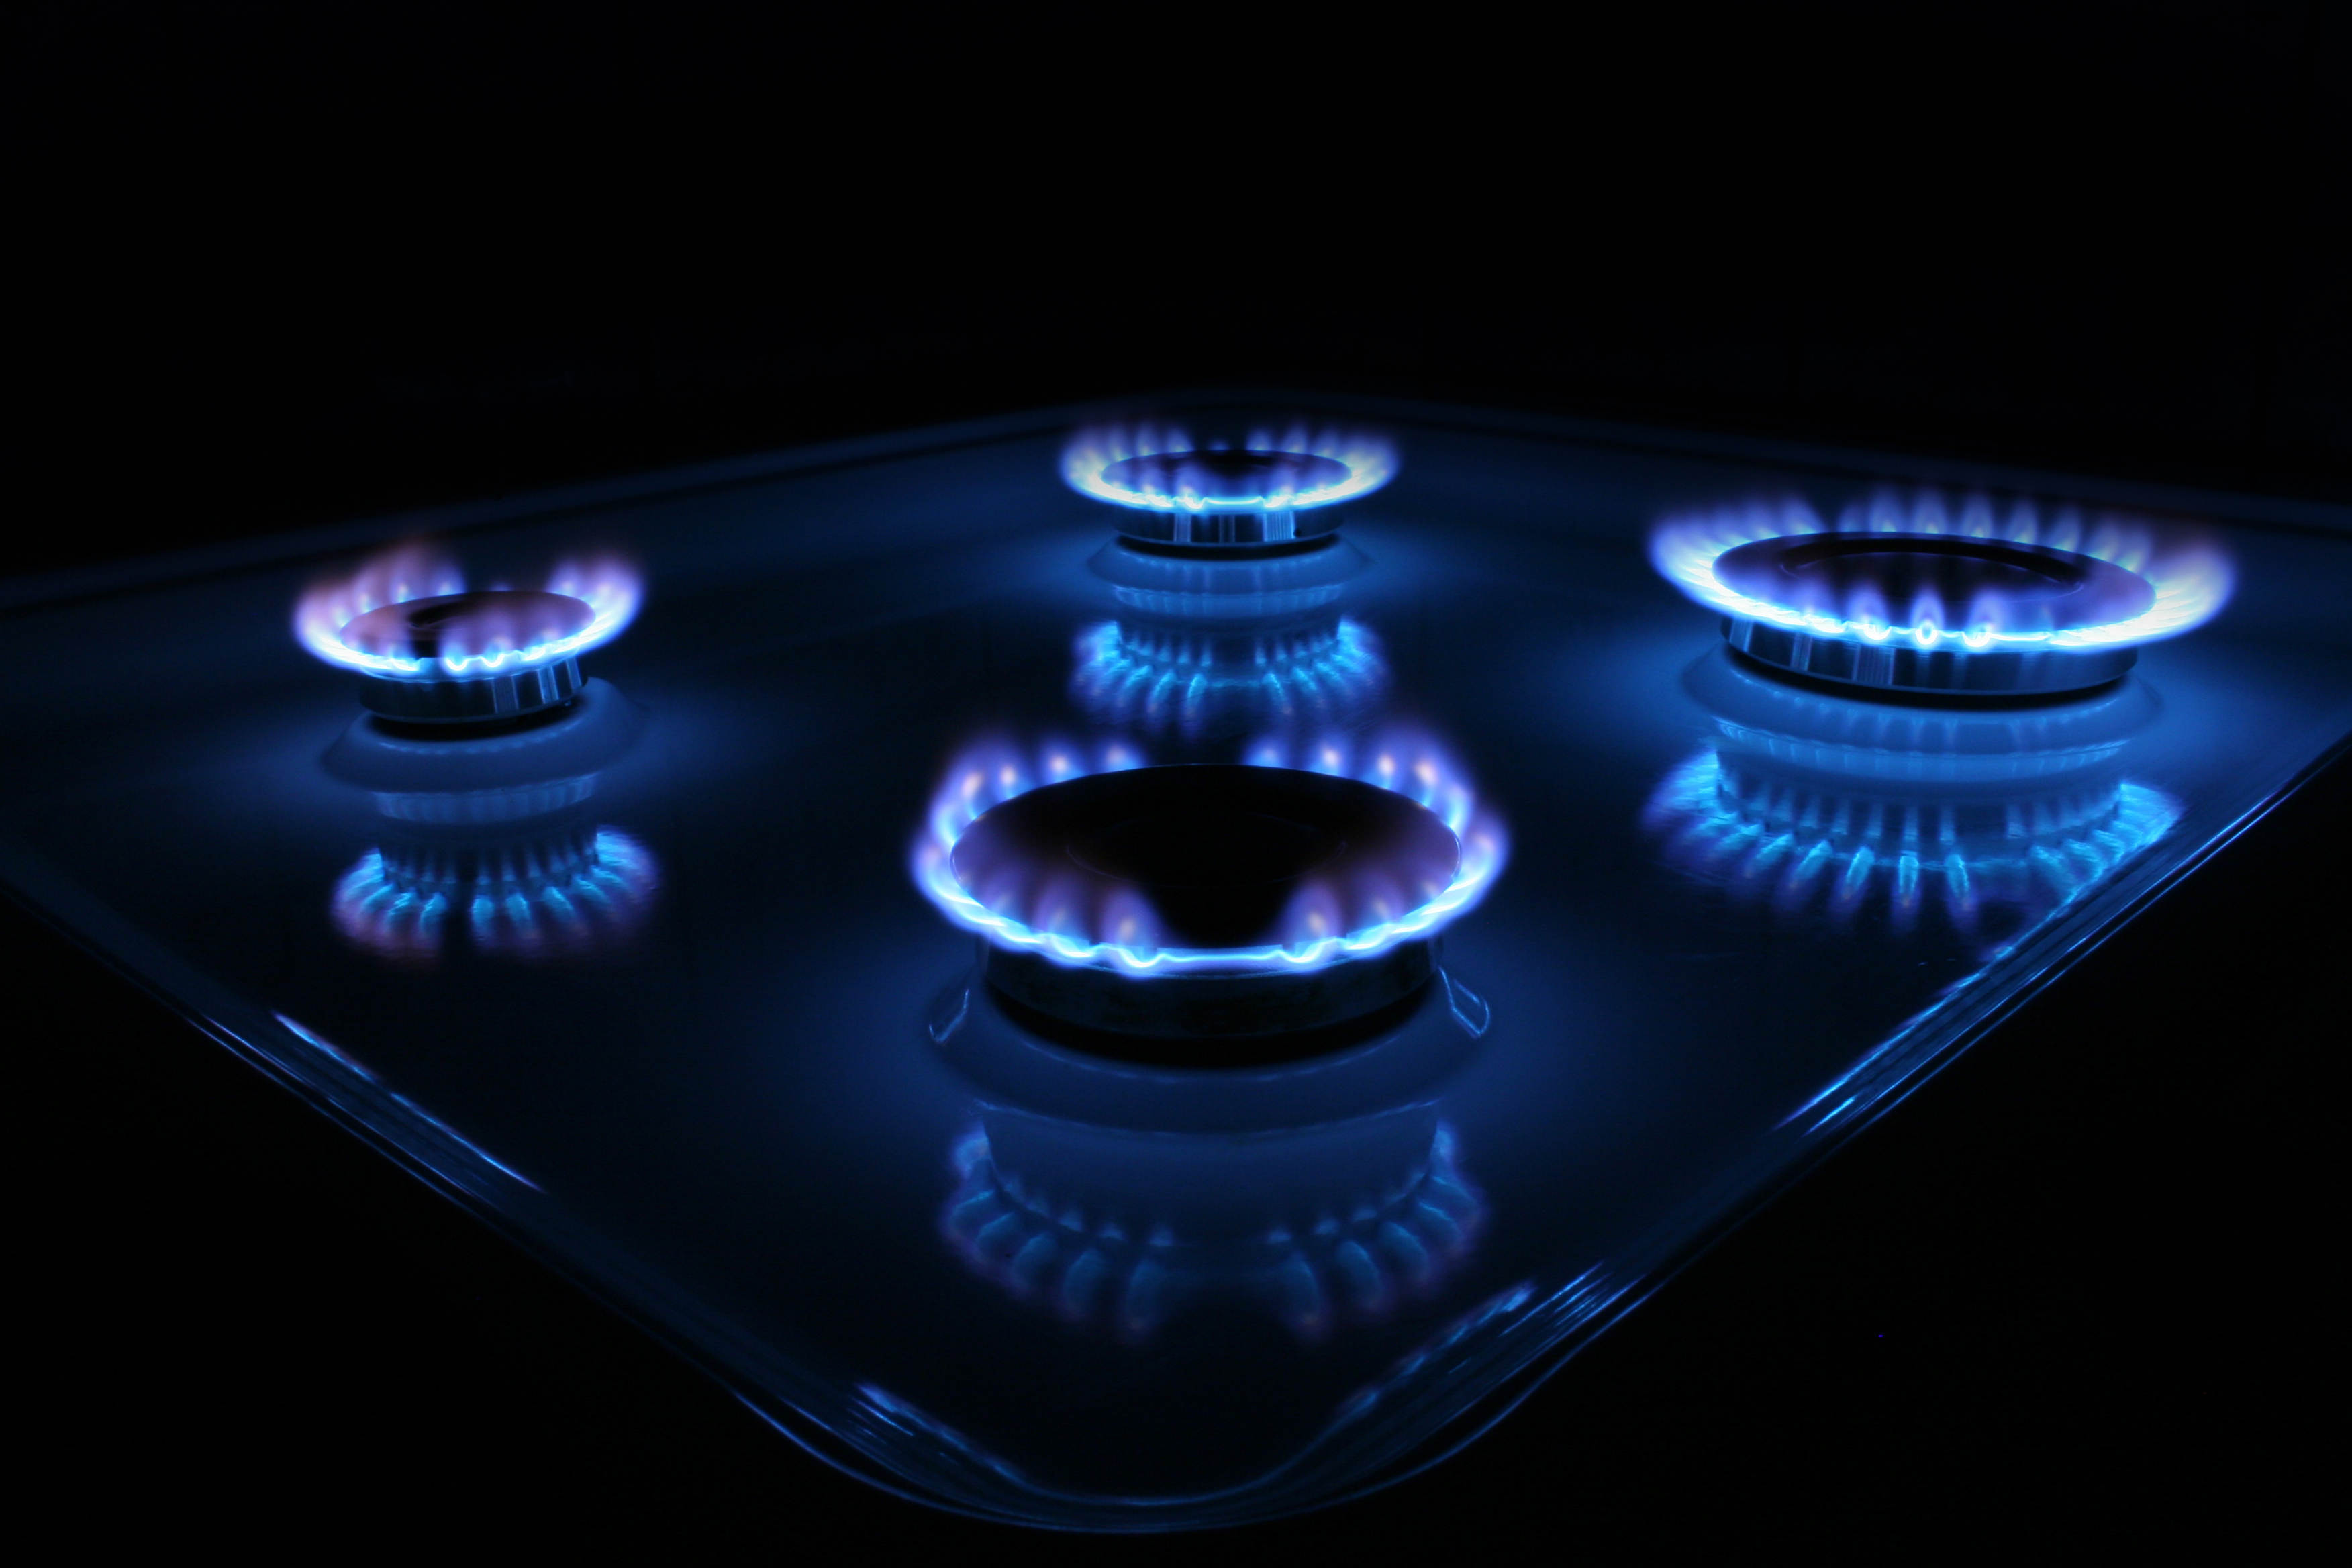 Creative_Wallpaper_The_flame_on_a_gas_stove_086581_